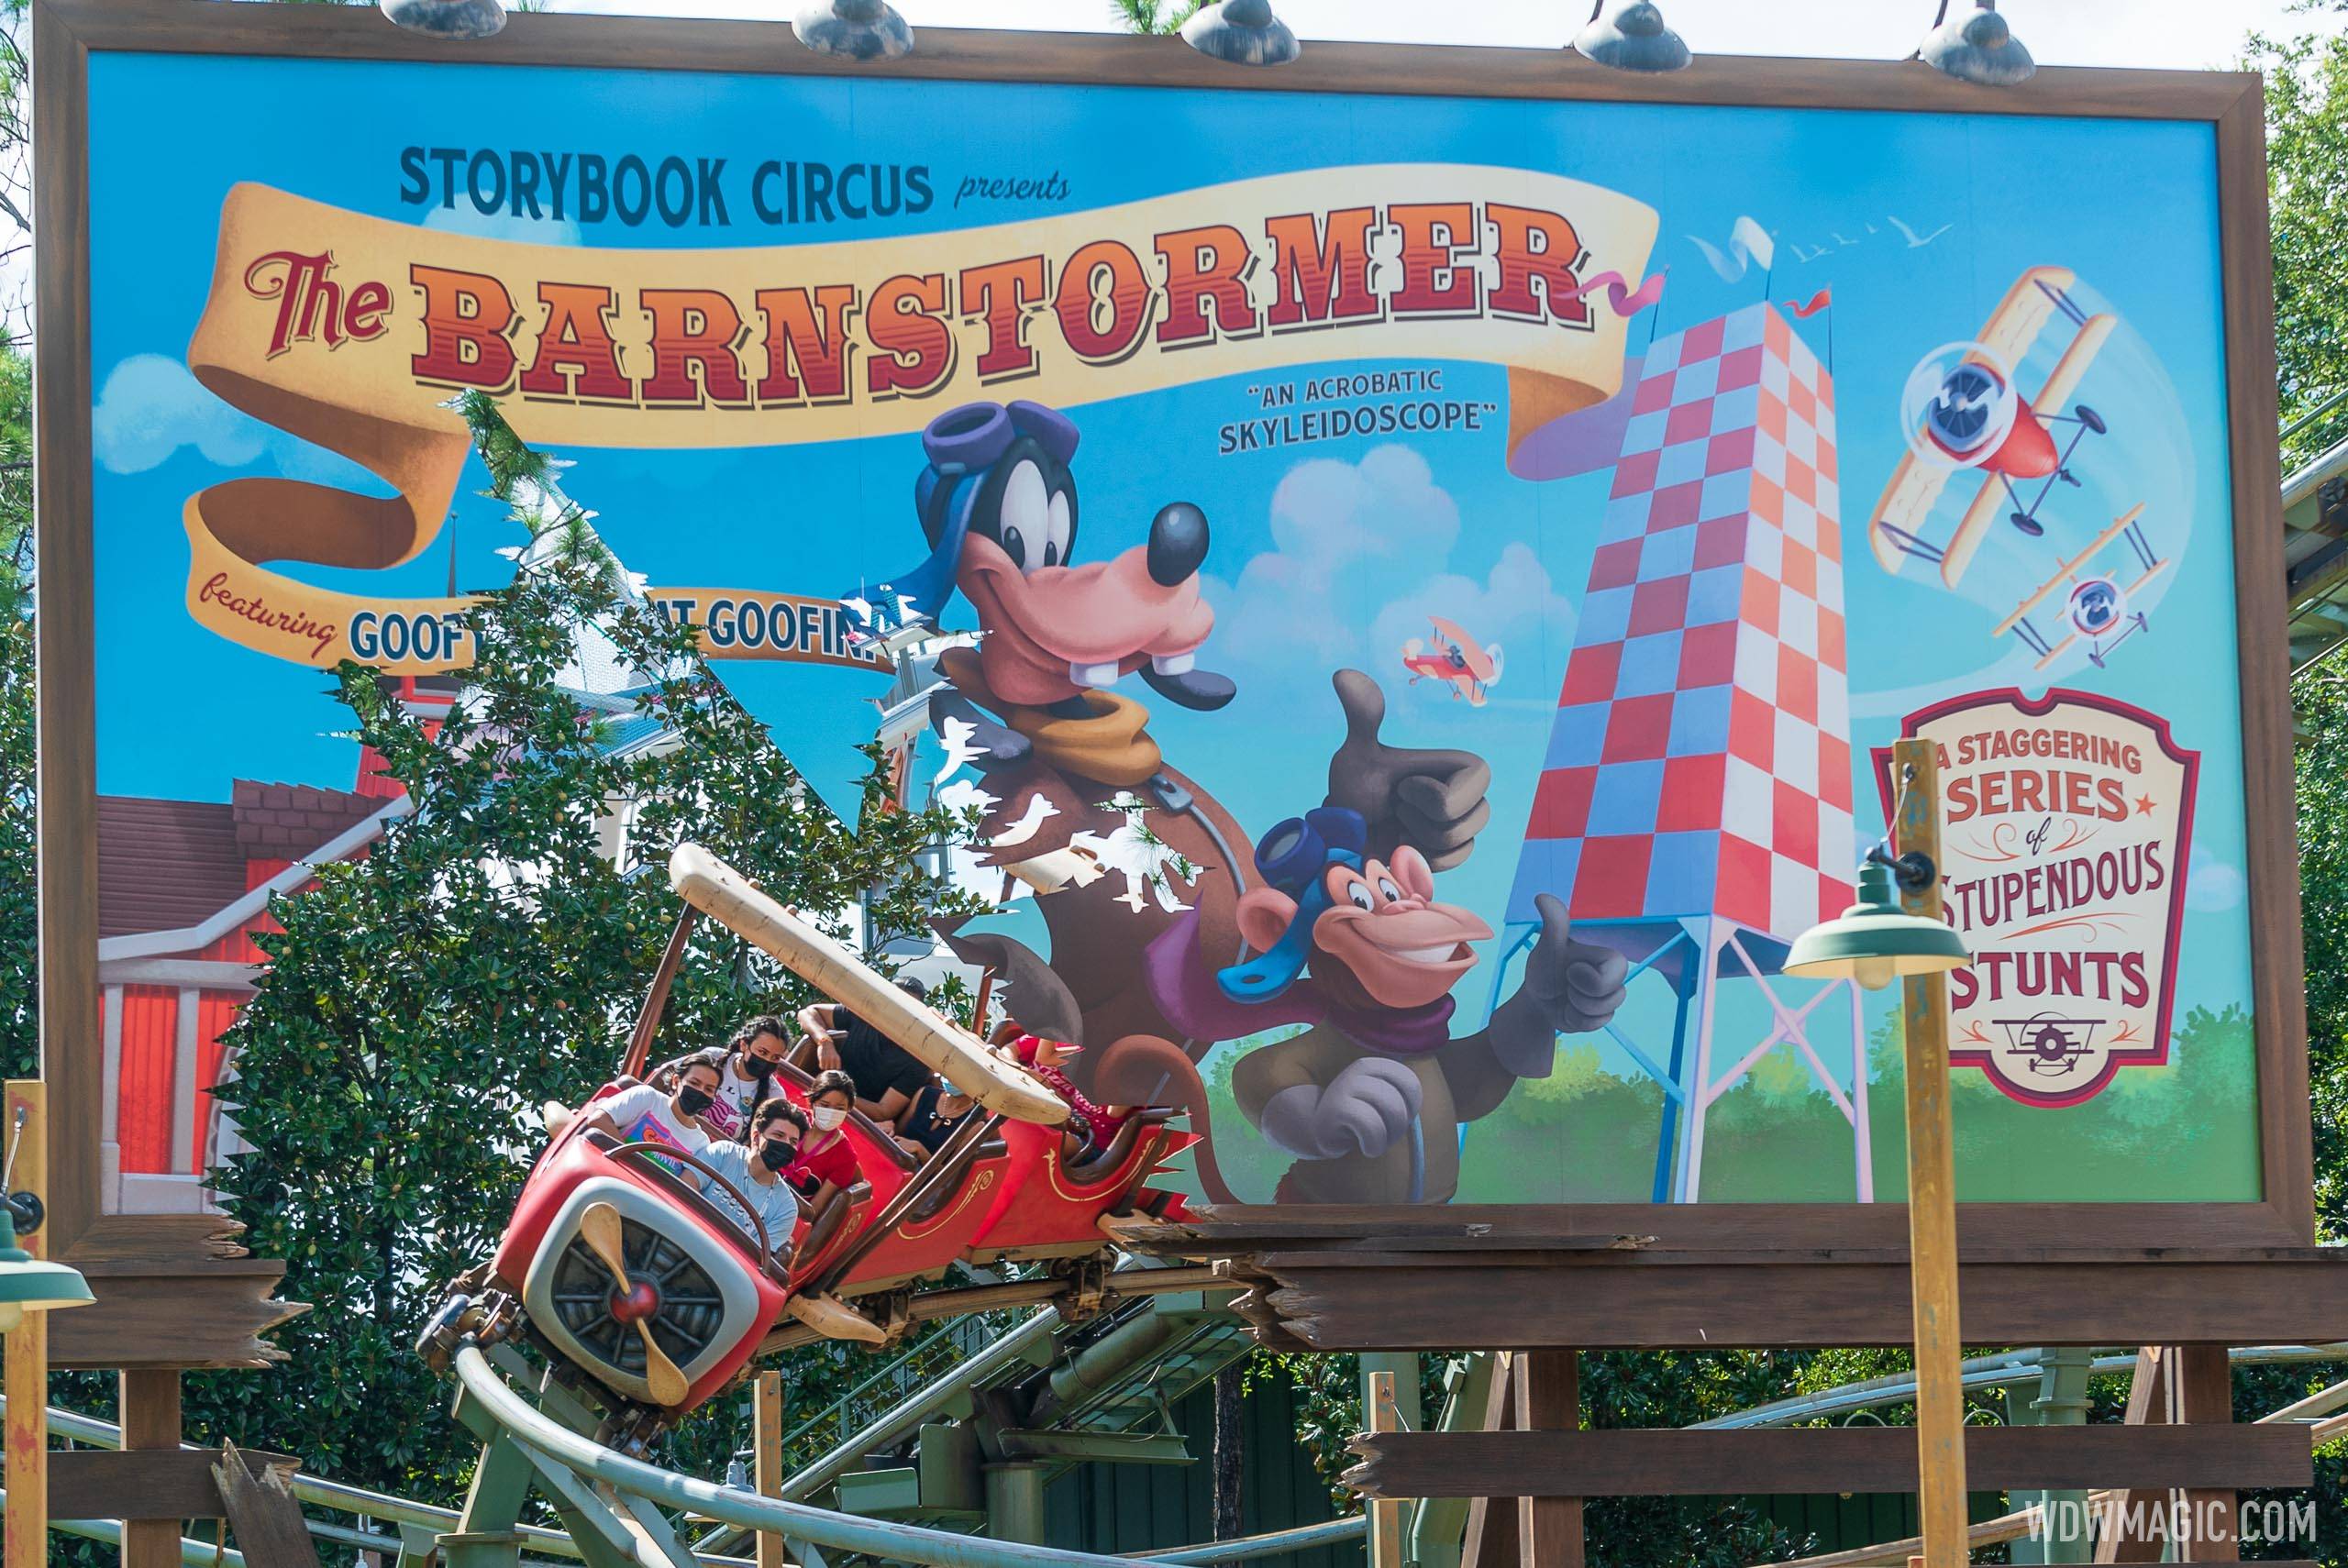 Masks required on outdoor coasters like Barnstormer